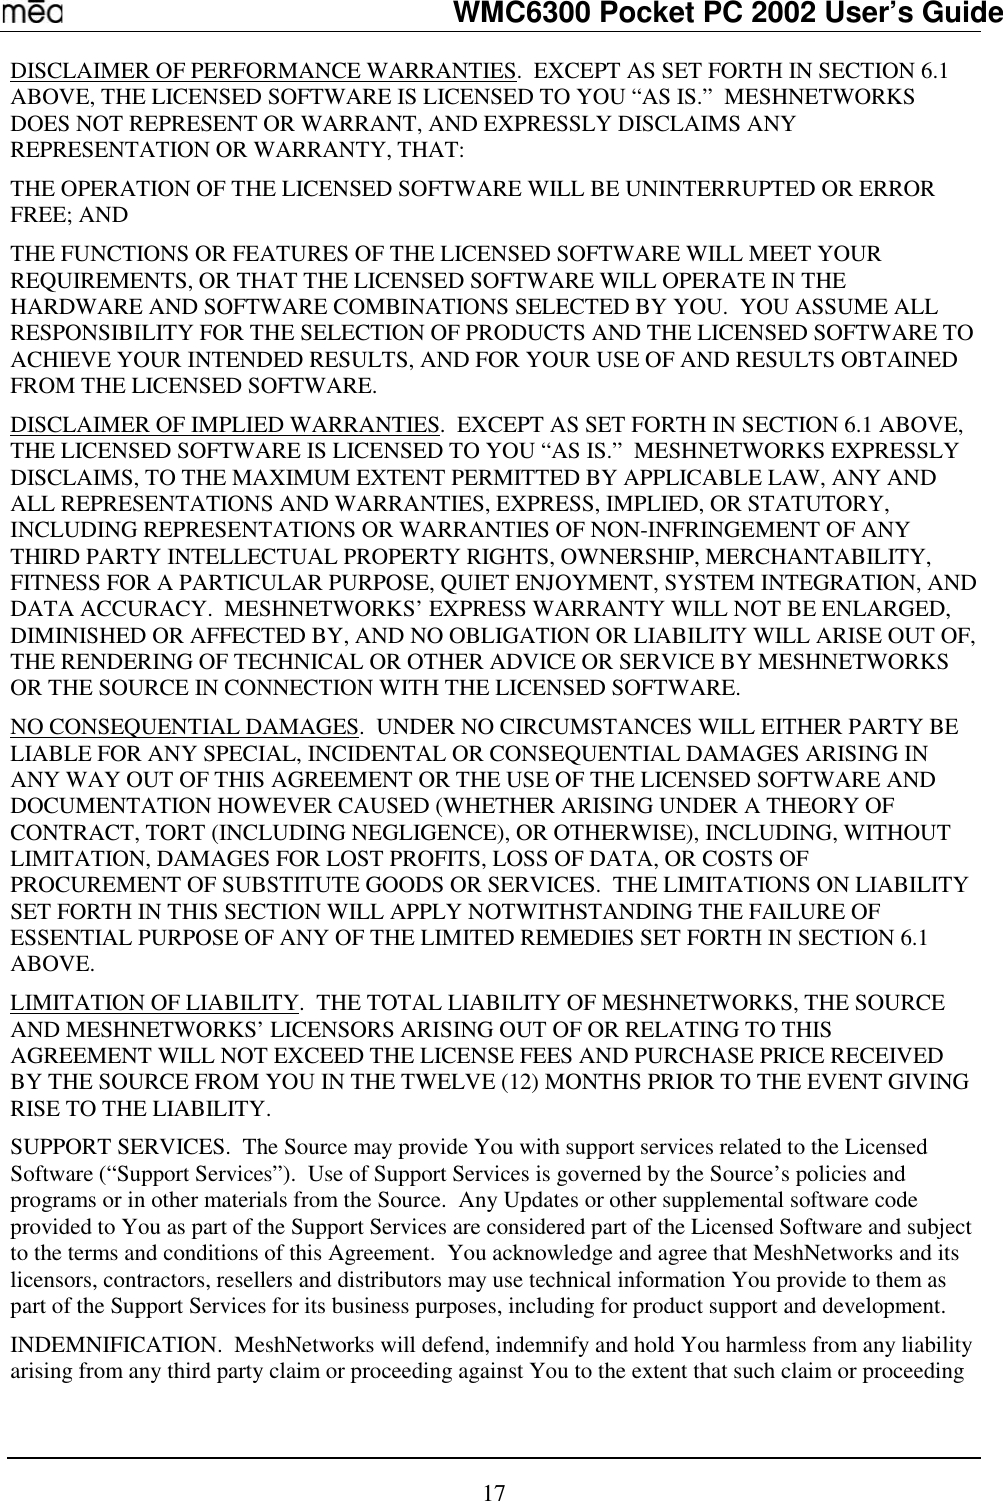   WMC6300 Pocket PC 2002 User’s Guide 17 DISCLAIMER OF PERFORMANCE WARRANTIES.  EXCEPT AS SET FORTH IN SECTION 6.1 ABOVE, THE LICENSED SOFTWARE IS LICENSED TO YOU “AS IS.”  MESHNETWORKS DOES NOT REPRESENT OR WARRANT, AND EXPRESSLY DISCLAIMS ANY REPRESENTATION OR WARRANTY, THAT: THE OPERATION OF THE LICENSED SOFTWARE WILL BE UNINTERRUPTED OR ERROR FREE; AND THE FUNCTIONS OR FEATURES OF THE LICENSED SOFTWARE WILL MEET YOUR REQUIREMENTS, OR THAT THE LICENSED SOFTWARE WILL OPERATE IN THE HARDWARE AND SOFTWARE COMBINATIONS SELECTED BY YOU.  YOU ASSUME ALL RESPONSIBILITY FOR THE SELECTION OF PRODUCTS AND THE LICENSED SOFTWARE TO ACHIEVE YOUR INTENDED RESULTS, AND FOR YOUR USE OF AND RESULTS OBTAINED FROM THE LICENSED SOFTWARE.  DISCLAIMER OF IMPLIED WARRANTIES.  EXCEPT AS SET FORTH IN SECTION 6.1 ABOVE, THE LICENSED SOFTWARE IS LICENSED TO YOU “AS IS.”  MESHNETWORKS EXPRESSLY DISCLAIMS, TO THE MAXIMUM EXTENT PERMITTED BY APPLICABLE LAW, ANY AND ALL REPRESENTATIONS AND WARRANTIES, EXPRESS, IMPLIED, OR STATUTORY, INCLUDING REPRESENTATIONS OR WARRANTIES OF NON-INFRINGEMENT OF ANY THIRD PARTY INTELLECTUAL PROPERTY RIGHTS, OWNERSHIP, MERCHANTABILITY, FITNESS FOR A PARTICULAR PURPOSE, QUIET ENJOYMENT, SYSTEM INTEGRATION, AND DATA ACCURACY.  MESHNETWORKS’ EXPRESS WARRANTY WILL NOT BE ENLARGED, DIMINISHED OR AFFECTED BY, AND NO OBLIGATION OR LIABILITY WILL ARISE OUT OF, THE RENDERING OF TECHNICAL OR OTHER ADVICE OR SERVICE BY MESHNETWORKS OR THE SOURCE IN CONNECTION WITH THE LICENSED SOFTWARE. NO CONSEQUENTIAL DAMAGES.  UNDER NO CIRCUMSTANCES WILL EITHER PARTY BE LIABLE FOR ANY SPECIAL, INCIDENTAL OR CONSEQUENTIAL DAMAGES ARISING IN ANY WAY OUT OF THIS AGREEMENT OR THE USE OF THE LICENSED SOFTWARE AND DOCUMENTATION HOWEVER CAUSED (WHETHER ARISING UNDER A THEORY OF CONTRACT, TORT (INCLUDING NEGLIGENCE), OR OTHERWISE), INCLUDING, WITHOUT LIMITATION, DAMAGES FOR LOST PROFITS, LOSS OF DATA, OR COSTS OF PROCUREMENT OF SUBSTITUTE GOODS OR SERVICES.  THE LIMITATIONS ON LIABILITY SET FORTH IN THIS SECTION WILL APPLY NOTWITHSTANDING THE FAILURE OF ESSENTIAL PURPOSE OF ANY OF THE LIMITED REMEDIES SET FORTH IN SECTION 6.1 ABOVE.     LIMITATION OF LIABILITY.  THE TOTAL LIABILITY OF MESHNETWORKS, THE SOURCE AND MESHNETWORKS’ LICENSORS ARISING OUT OF OR RELATING TO THIS AGREEMENT WILL NOT EXCEED THE LICENSE FEES AND PURCHASE PRICE RECEIVED BY THE SOURCE FROM YOU IN THE TWELVE (12) MONTHS PRIOR TO THE EVENT GIVING RISE TO THE LIABILITY. SUPPORT SERVICES.  The Source may provide You with support services related to the Licensed Software (“Support Services”).  Use of Support Services is governed by the Source’s policies and programs or in other materials from the Source.  Any Updates or other supplemental software code provided to You as part of the Support Services are considered part of the Licensed Software and subject to the terms and conditions of this Agreement.  You acknowledge and agree that MeshNetworks and its licensors, contractors, resellers and distributors may use technical information You provide to them as part of the Support Services for its business purposes, including for product support and development. INDEMNIFICATION.  MeshNetworks will defend, indemnify and hold You harmless from any liability arising from any third party claim or proceeding against You to the extent that such claim or proceeding 